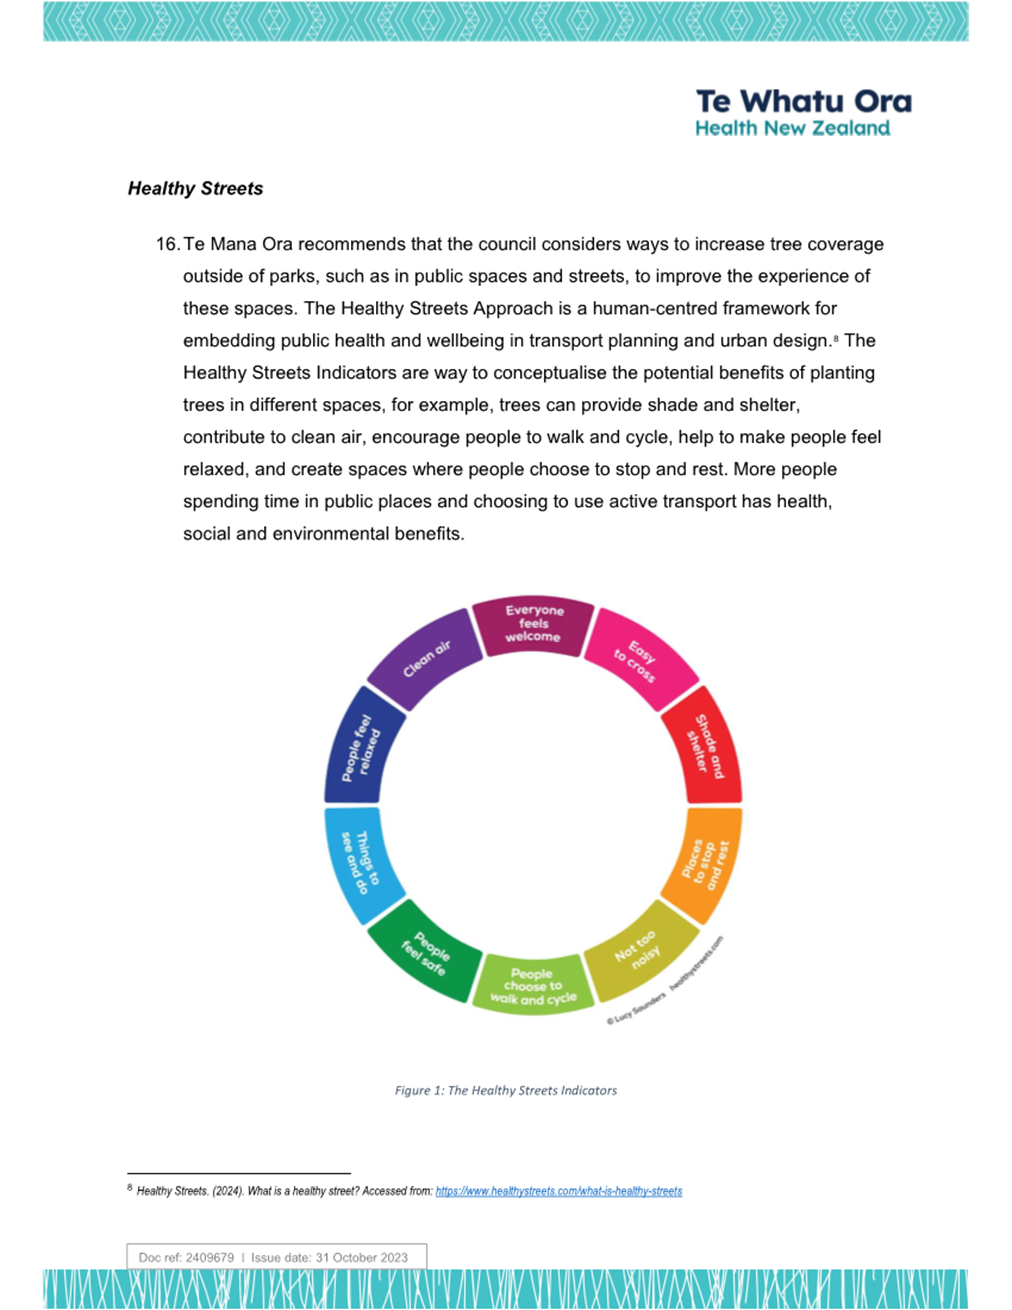 A colorful circular chart with text

Description automatically generated with medium confidence